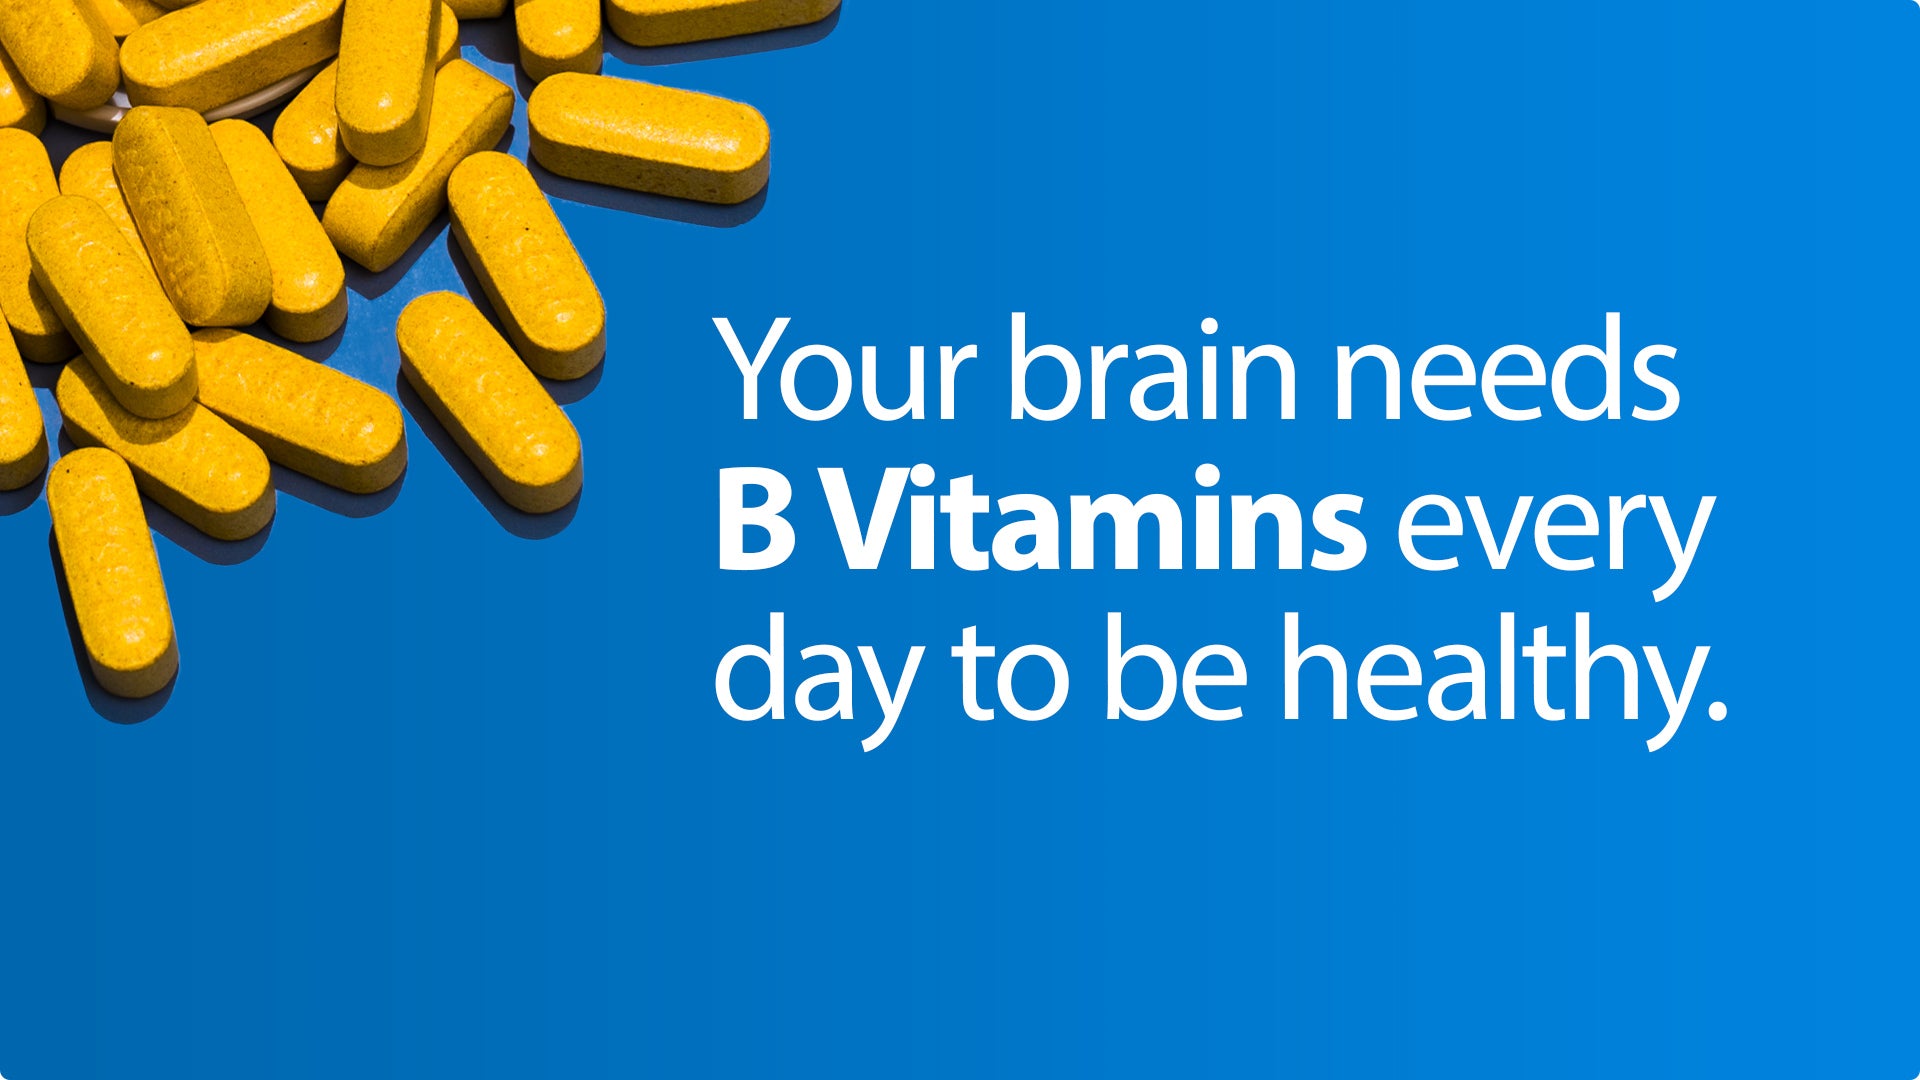 Your brain needs B vitamins every day to be healthy...